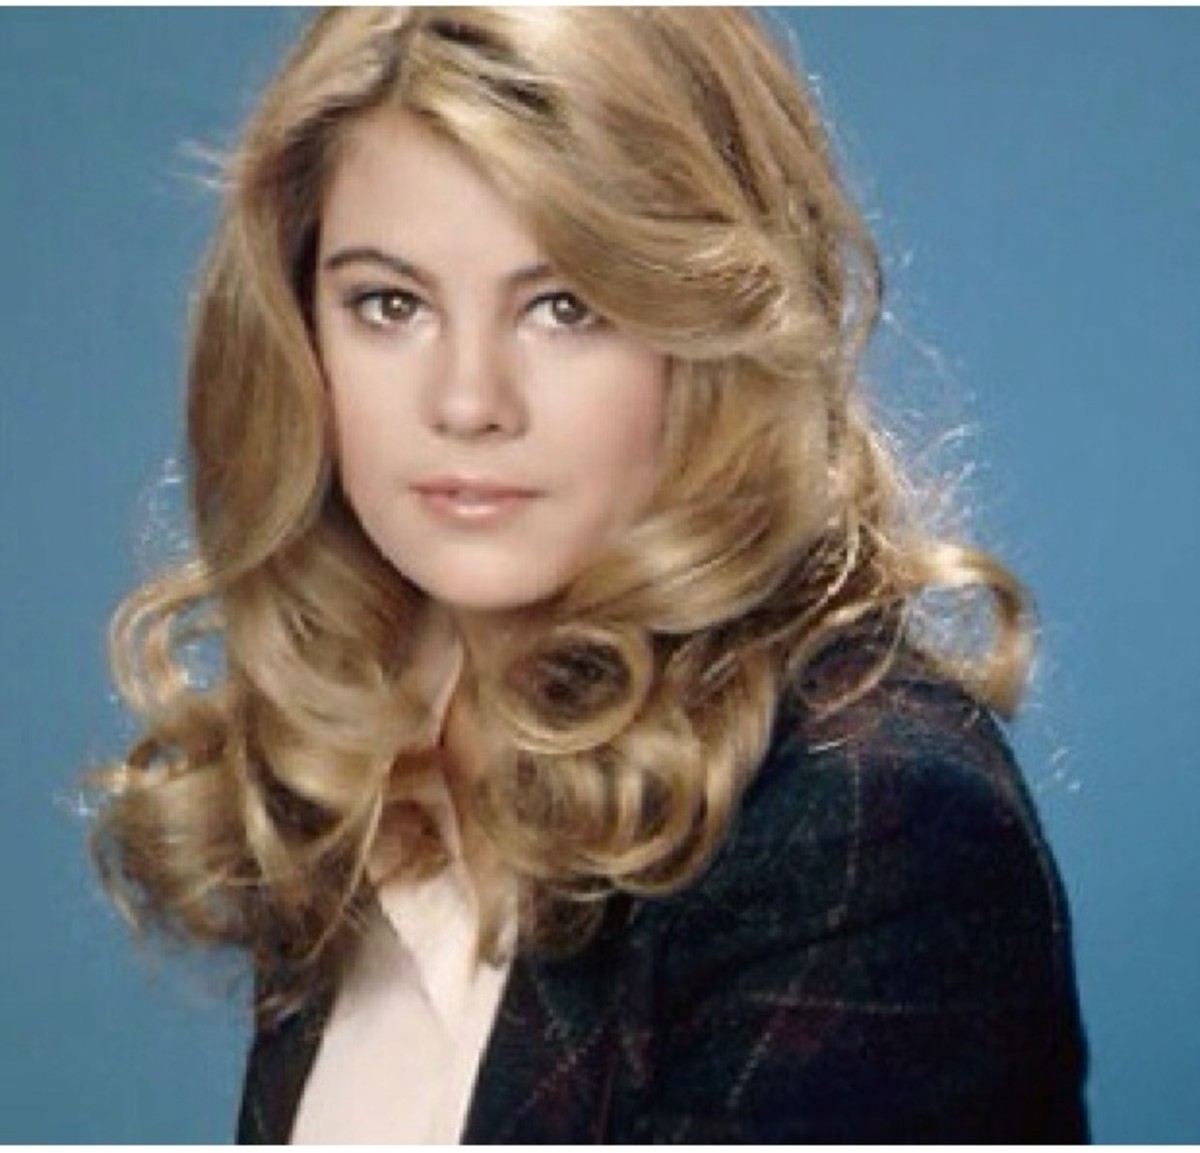 Blair Warner on Facts of Life had the prettiest blonde hair and brown eyes.